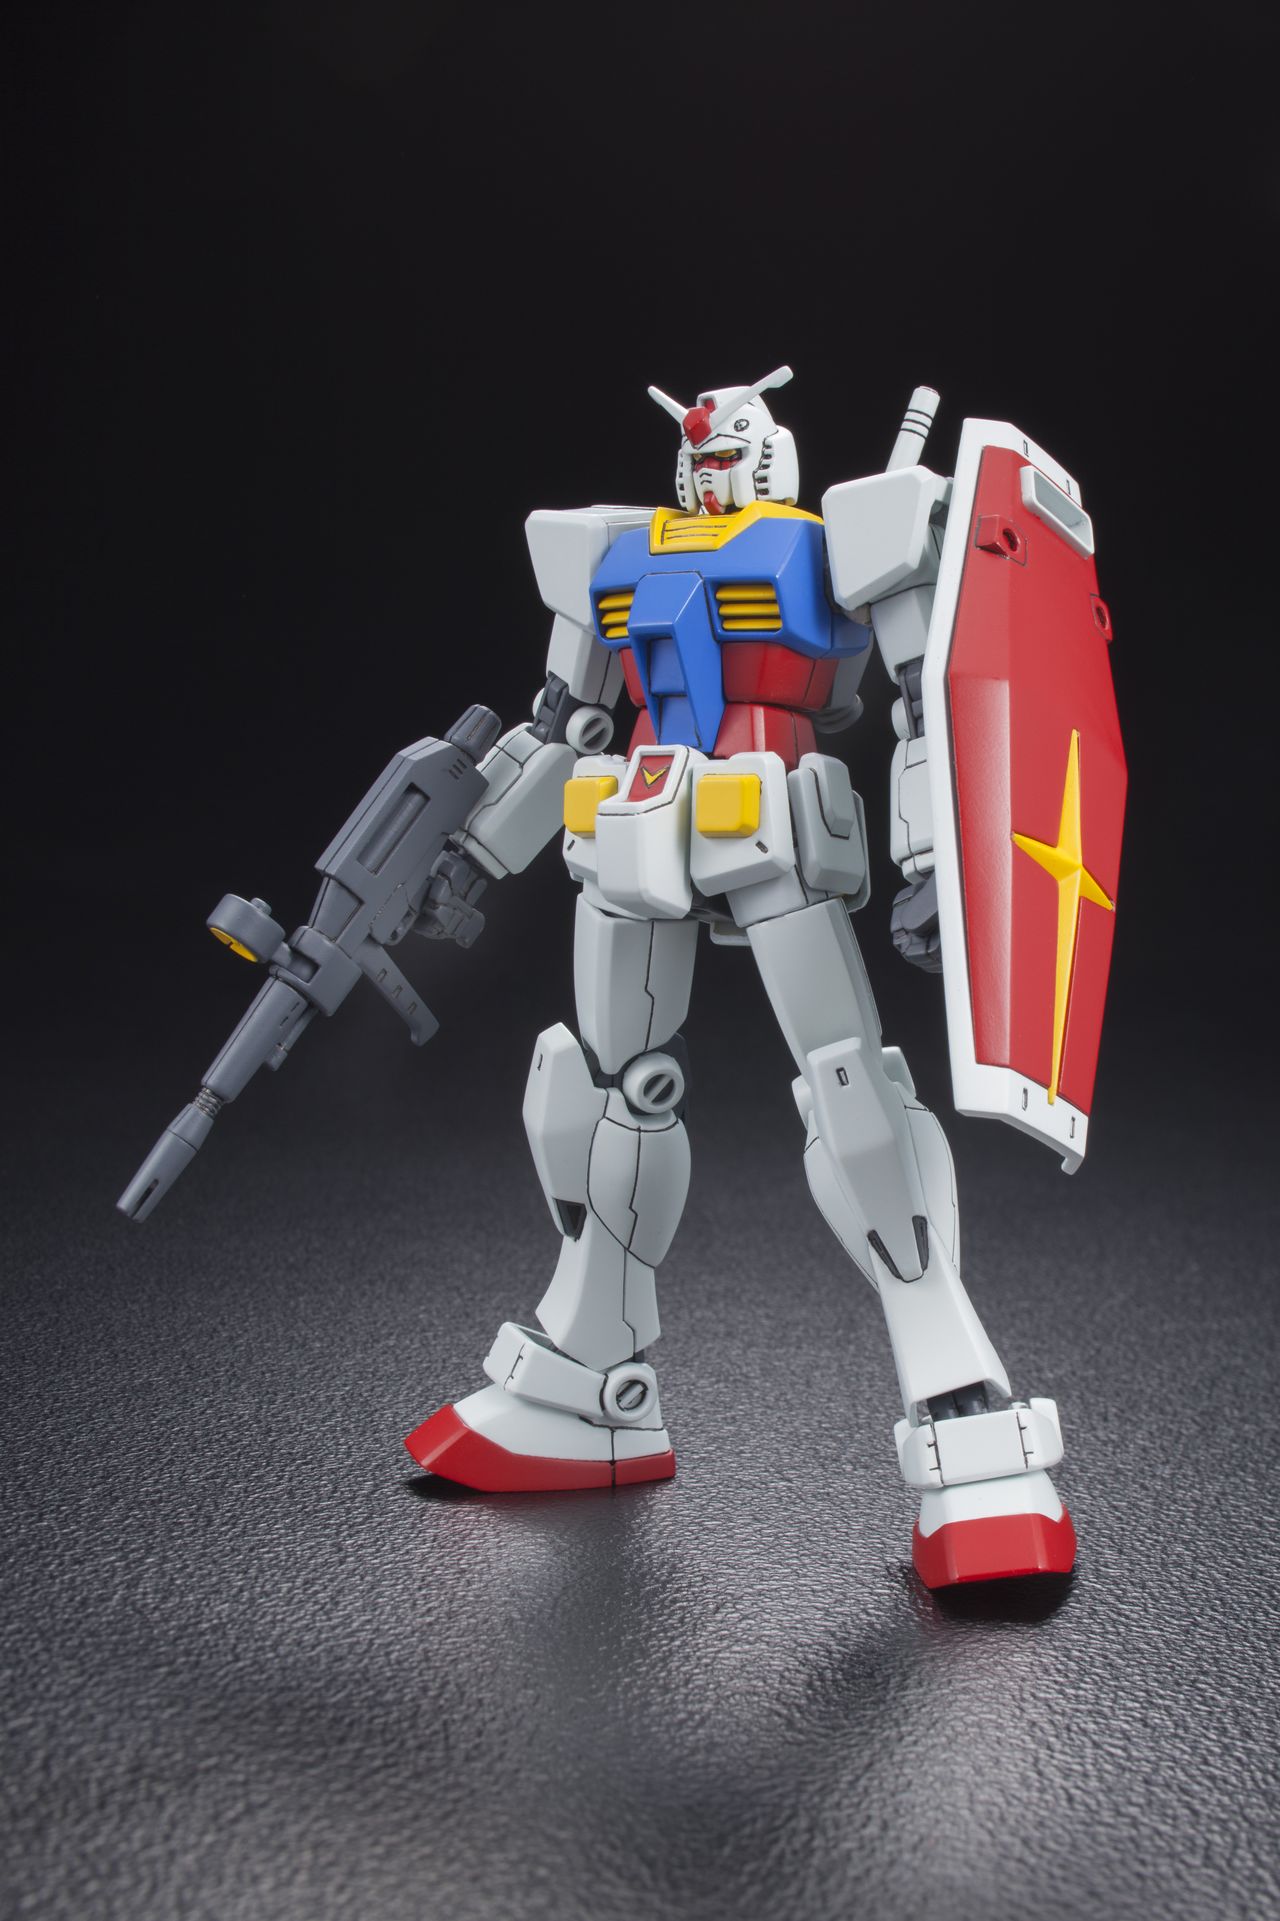 A Gundam RX-78-2 HGUCI 1/144 scale model released by Bandai in 2015 for the thirty-fifth anniversary of the series. (© Jiji)